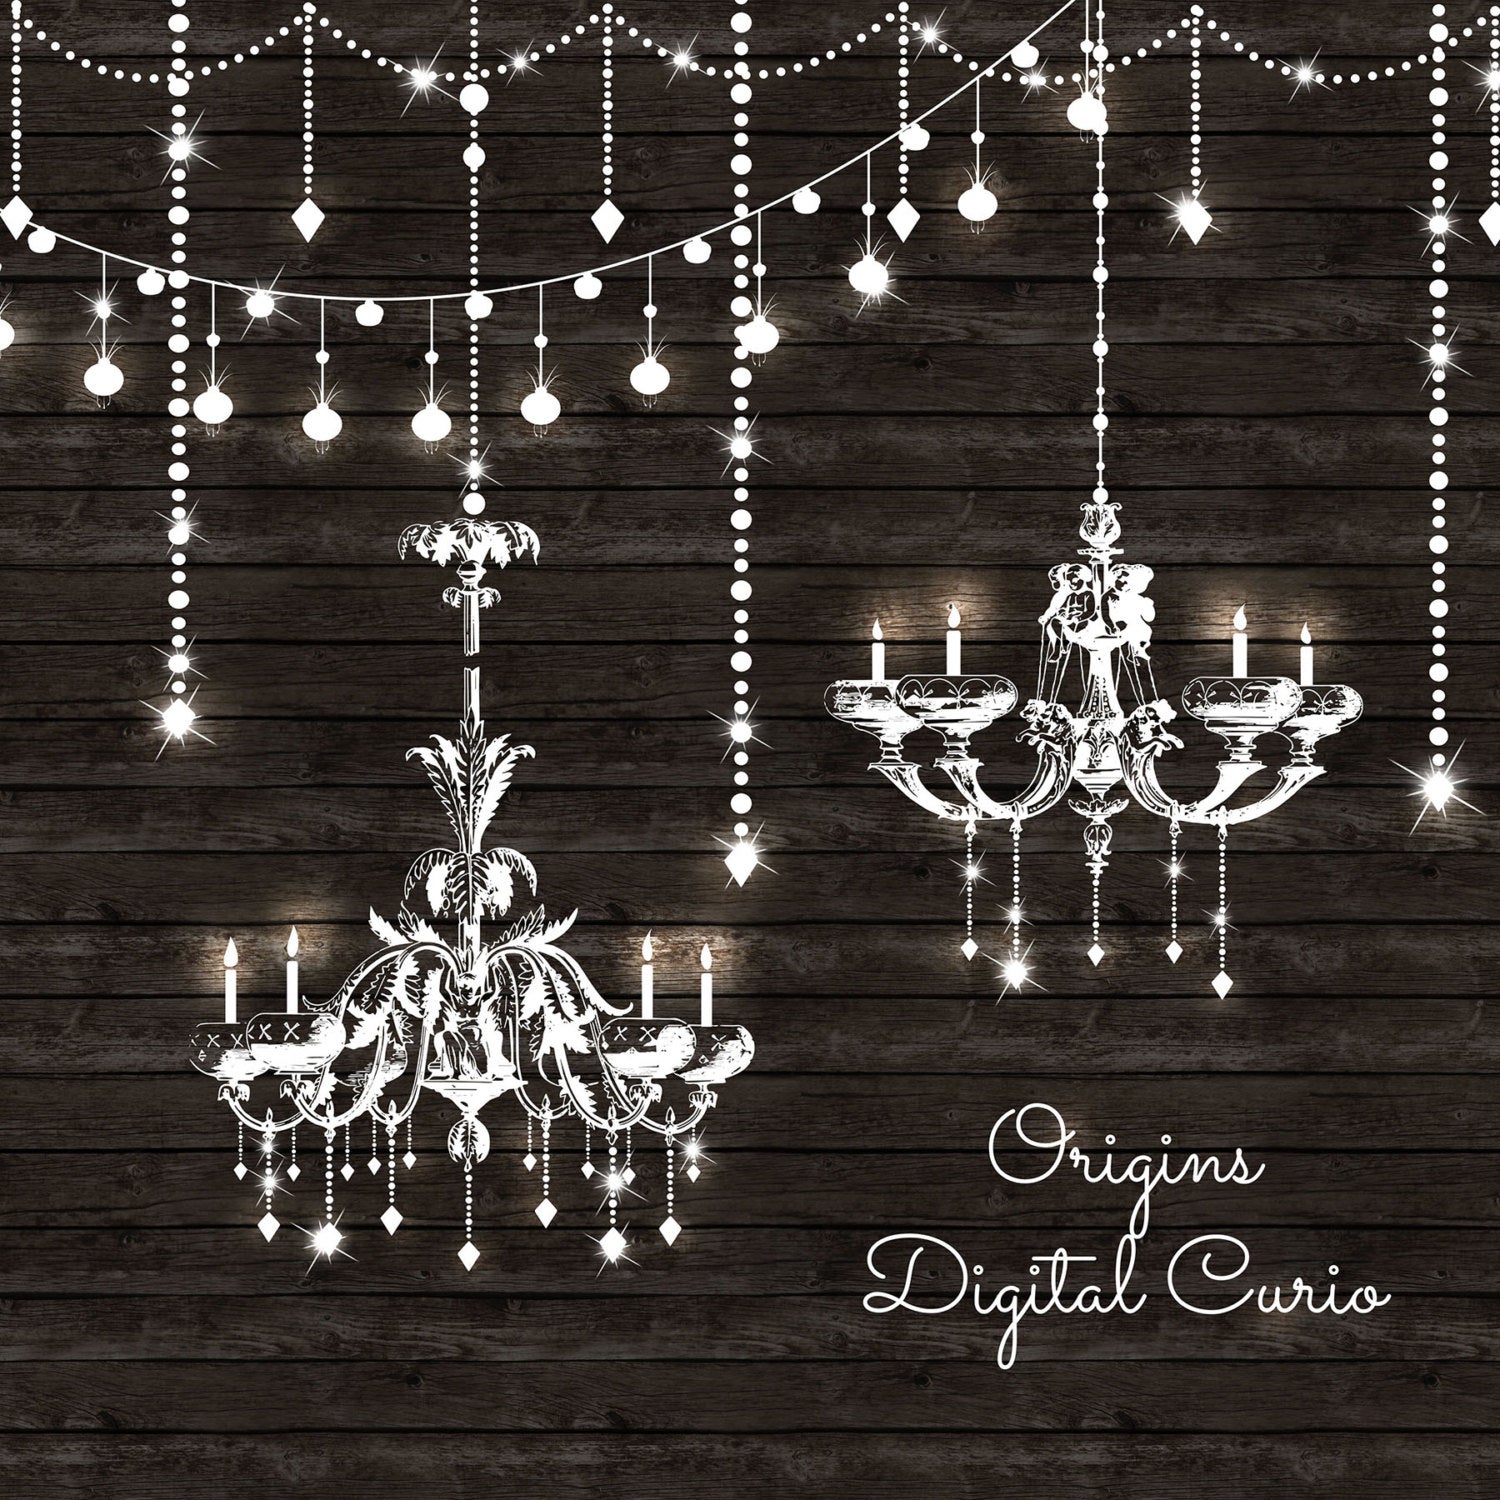 Chandelier clipart light decoration. Chandeliers and string lights